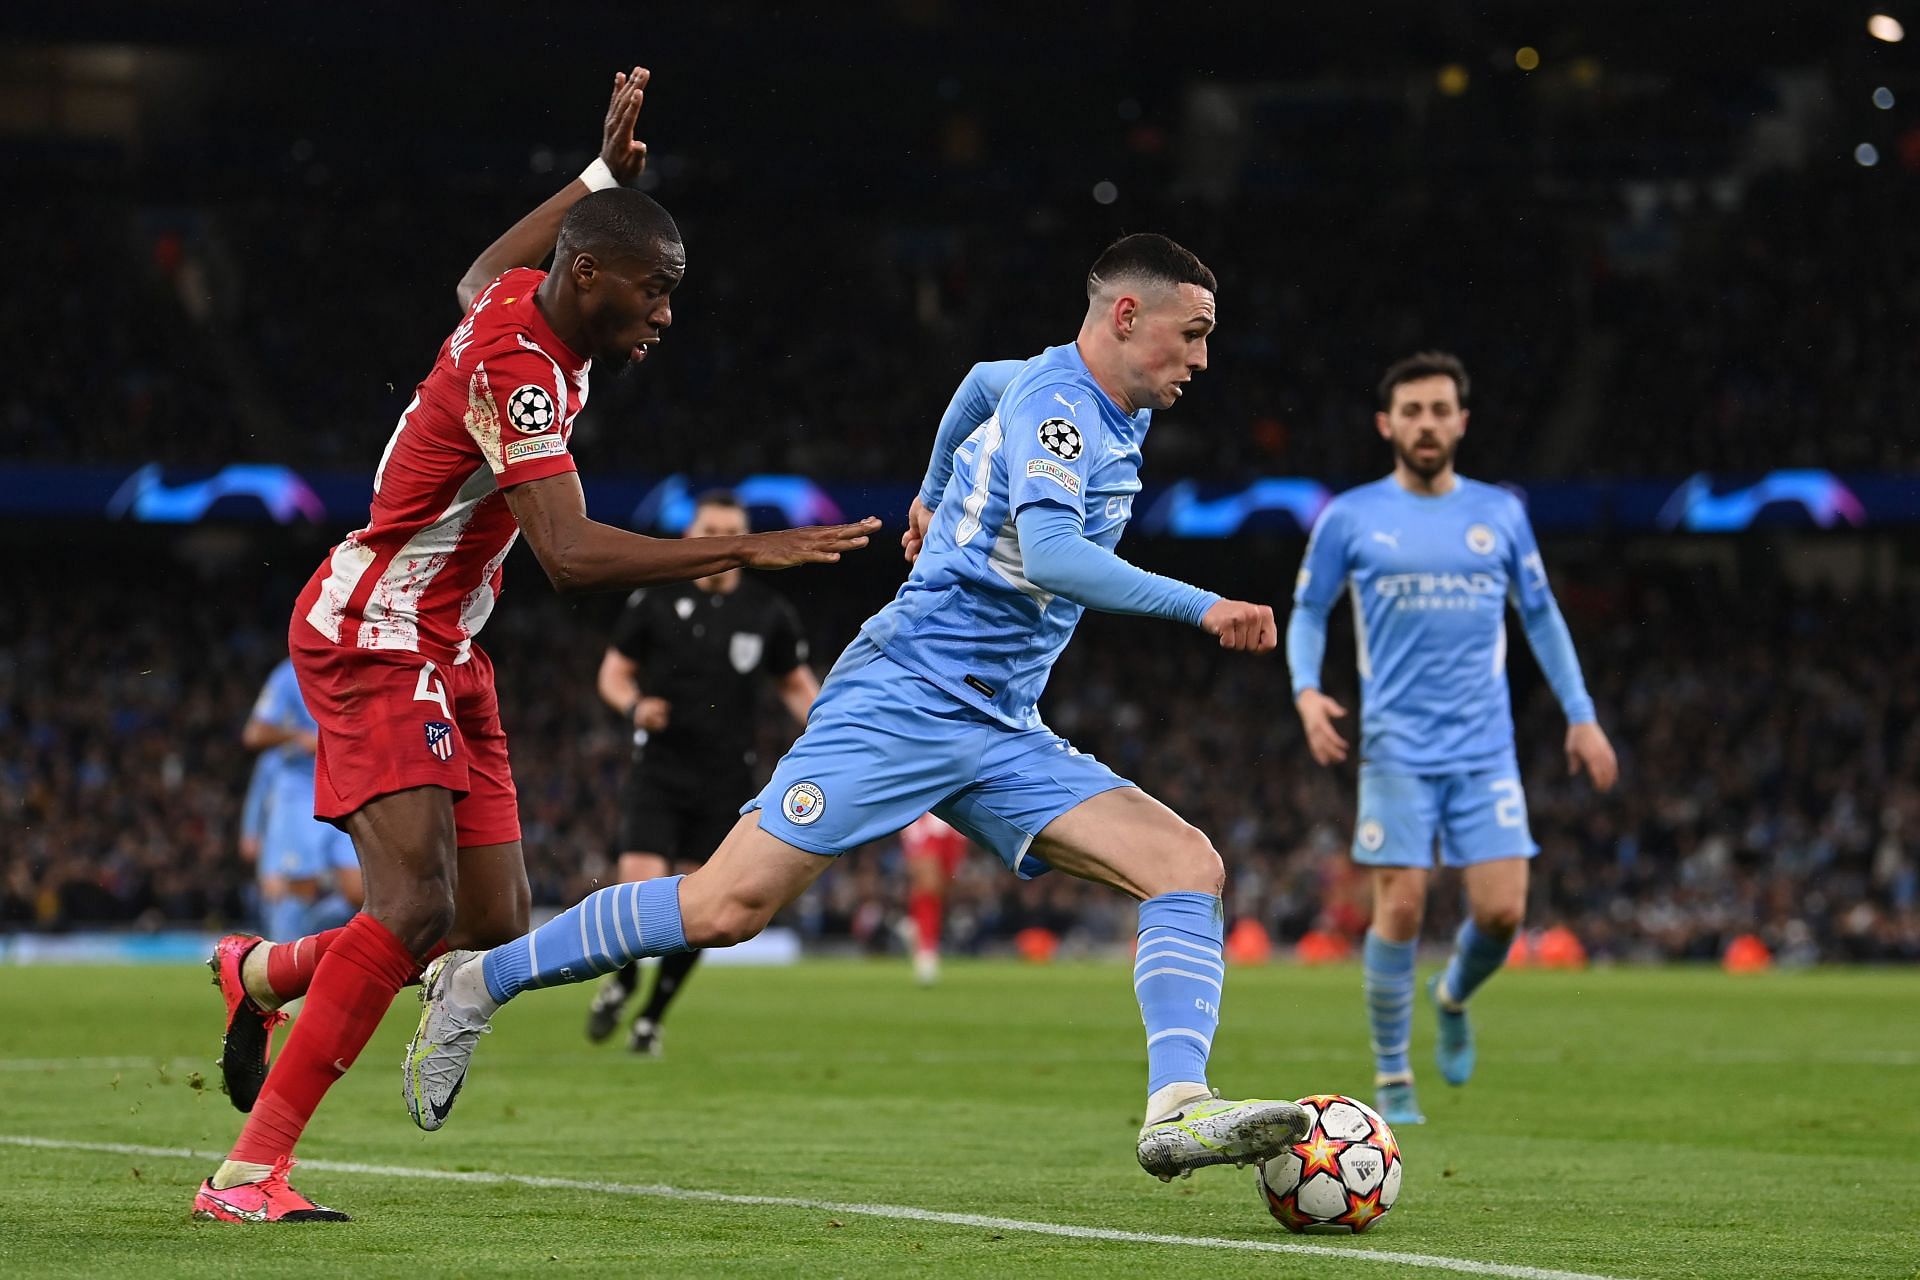 Manchester City head to the Wanda Metropolitano Stadium next week with the lead